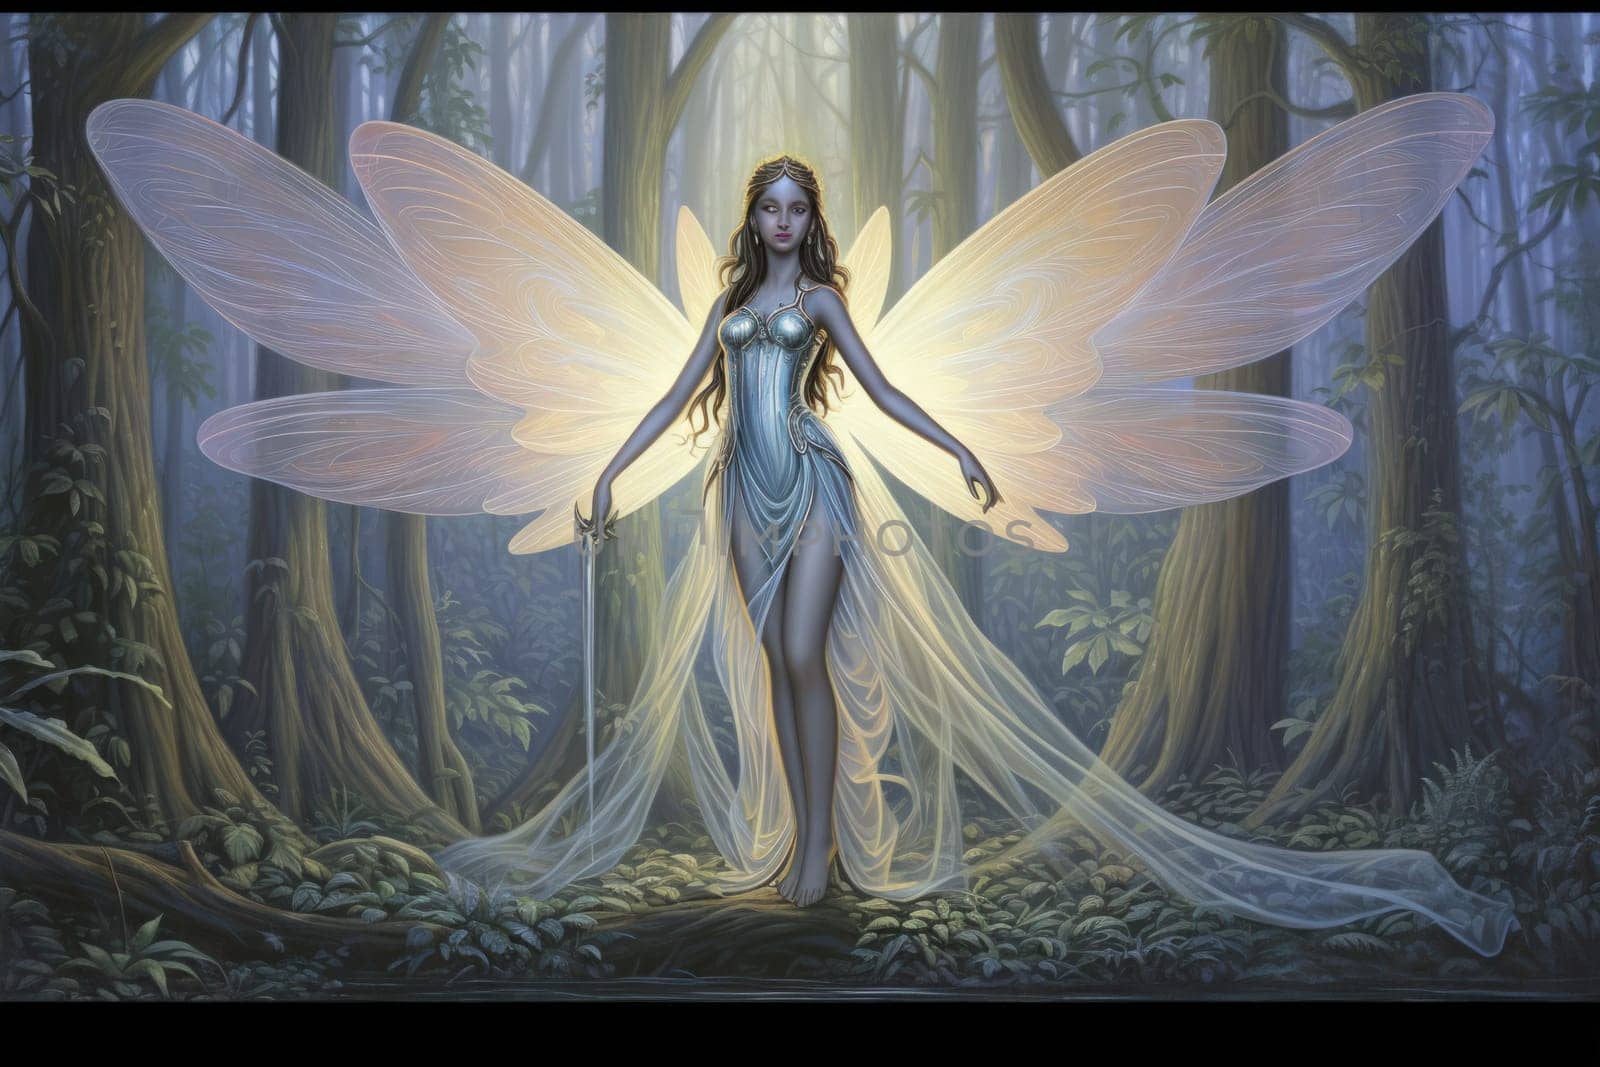 In a mystical realm filled with enchantment and wonder, luminescent fairies gracefully dance through the air, their iridescent wings shimmering with a kaleidoscope of colors.